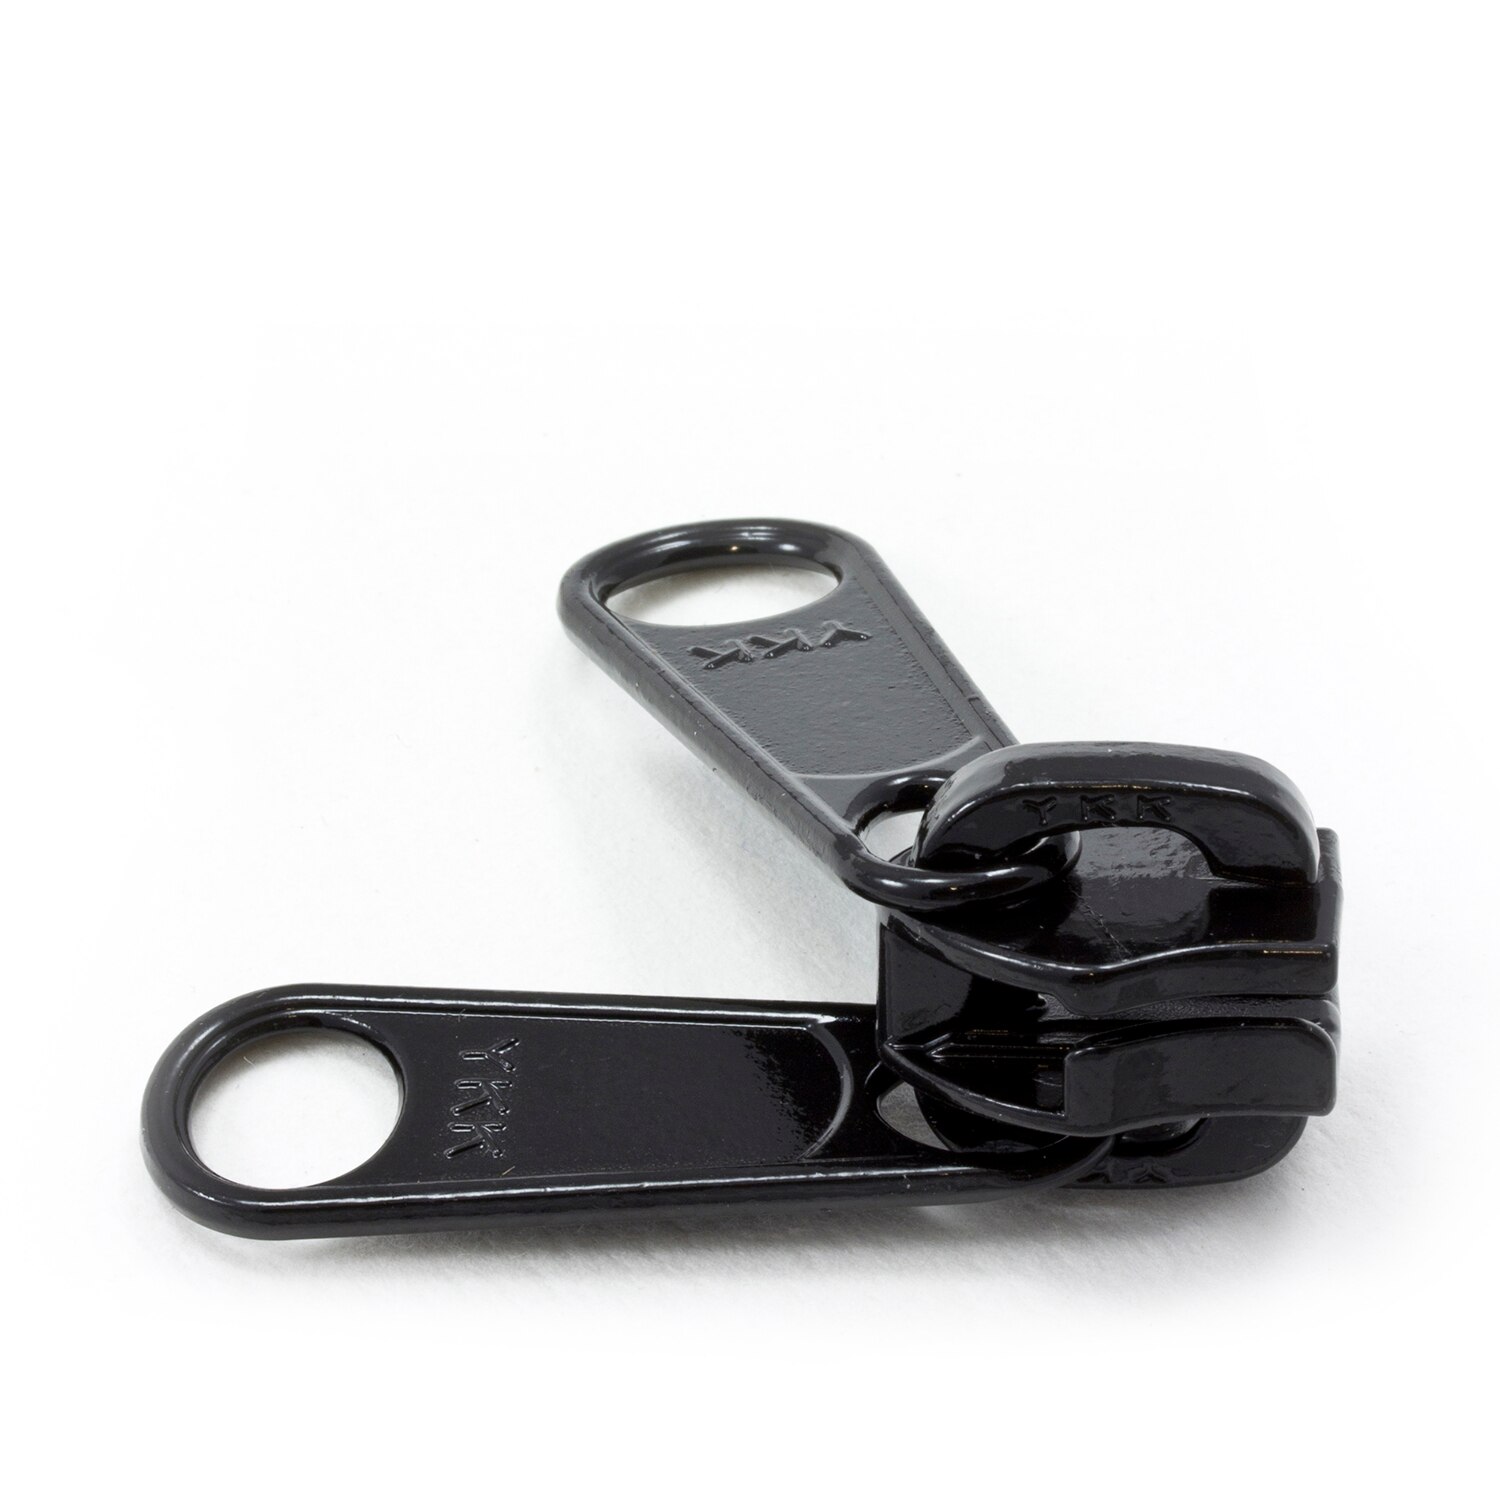 No 10 Plastic Chunky – Open End Zipper (BLACK) with Double Tab Non Lock  Slider – Holdfast Components